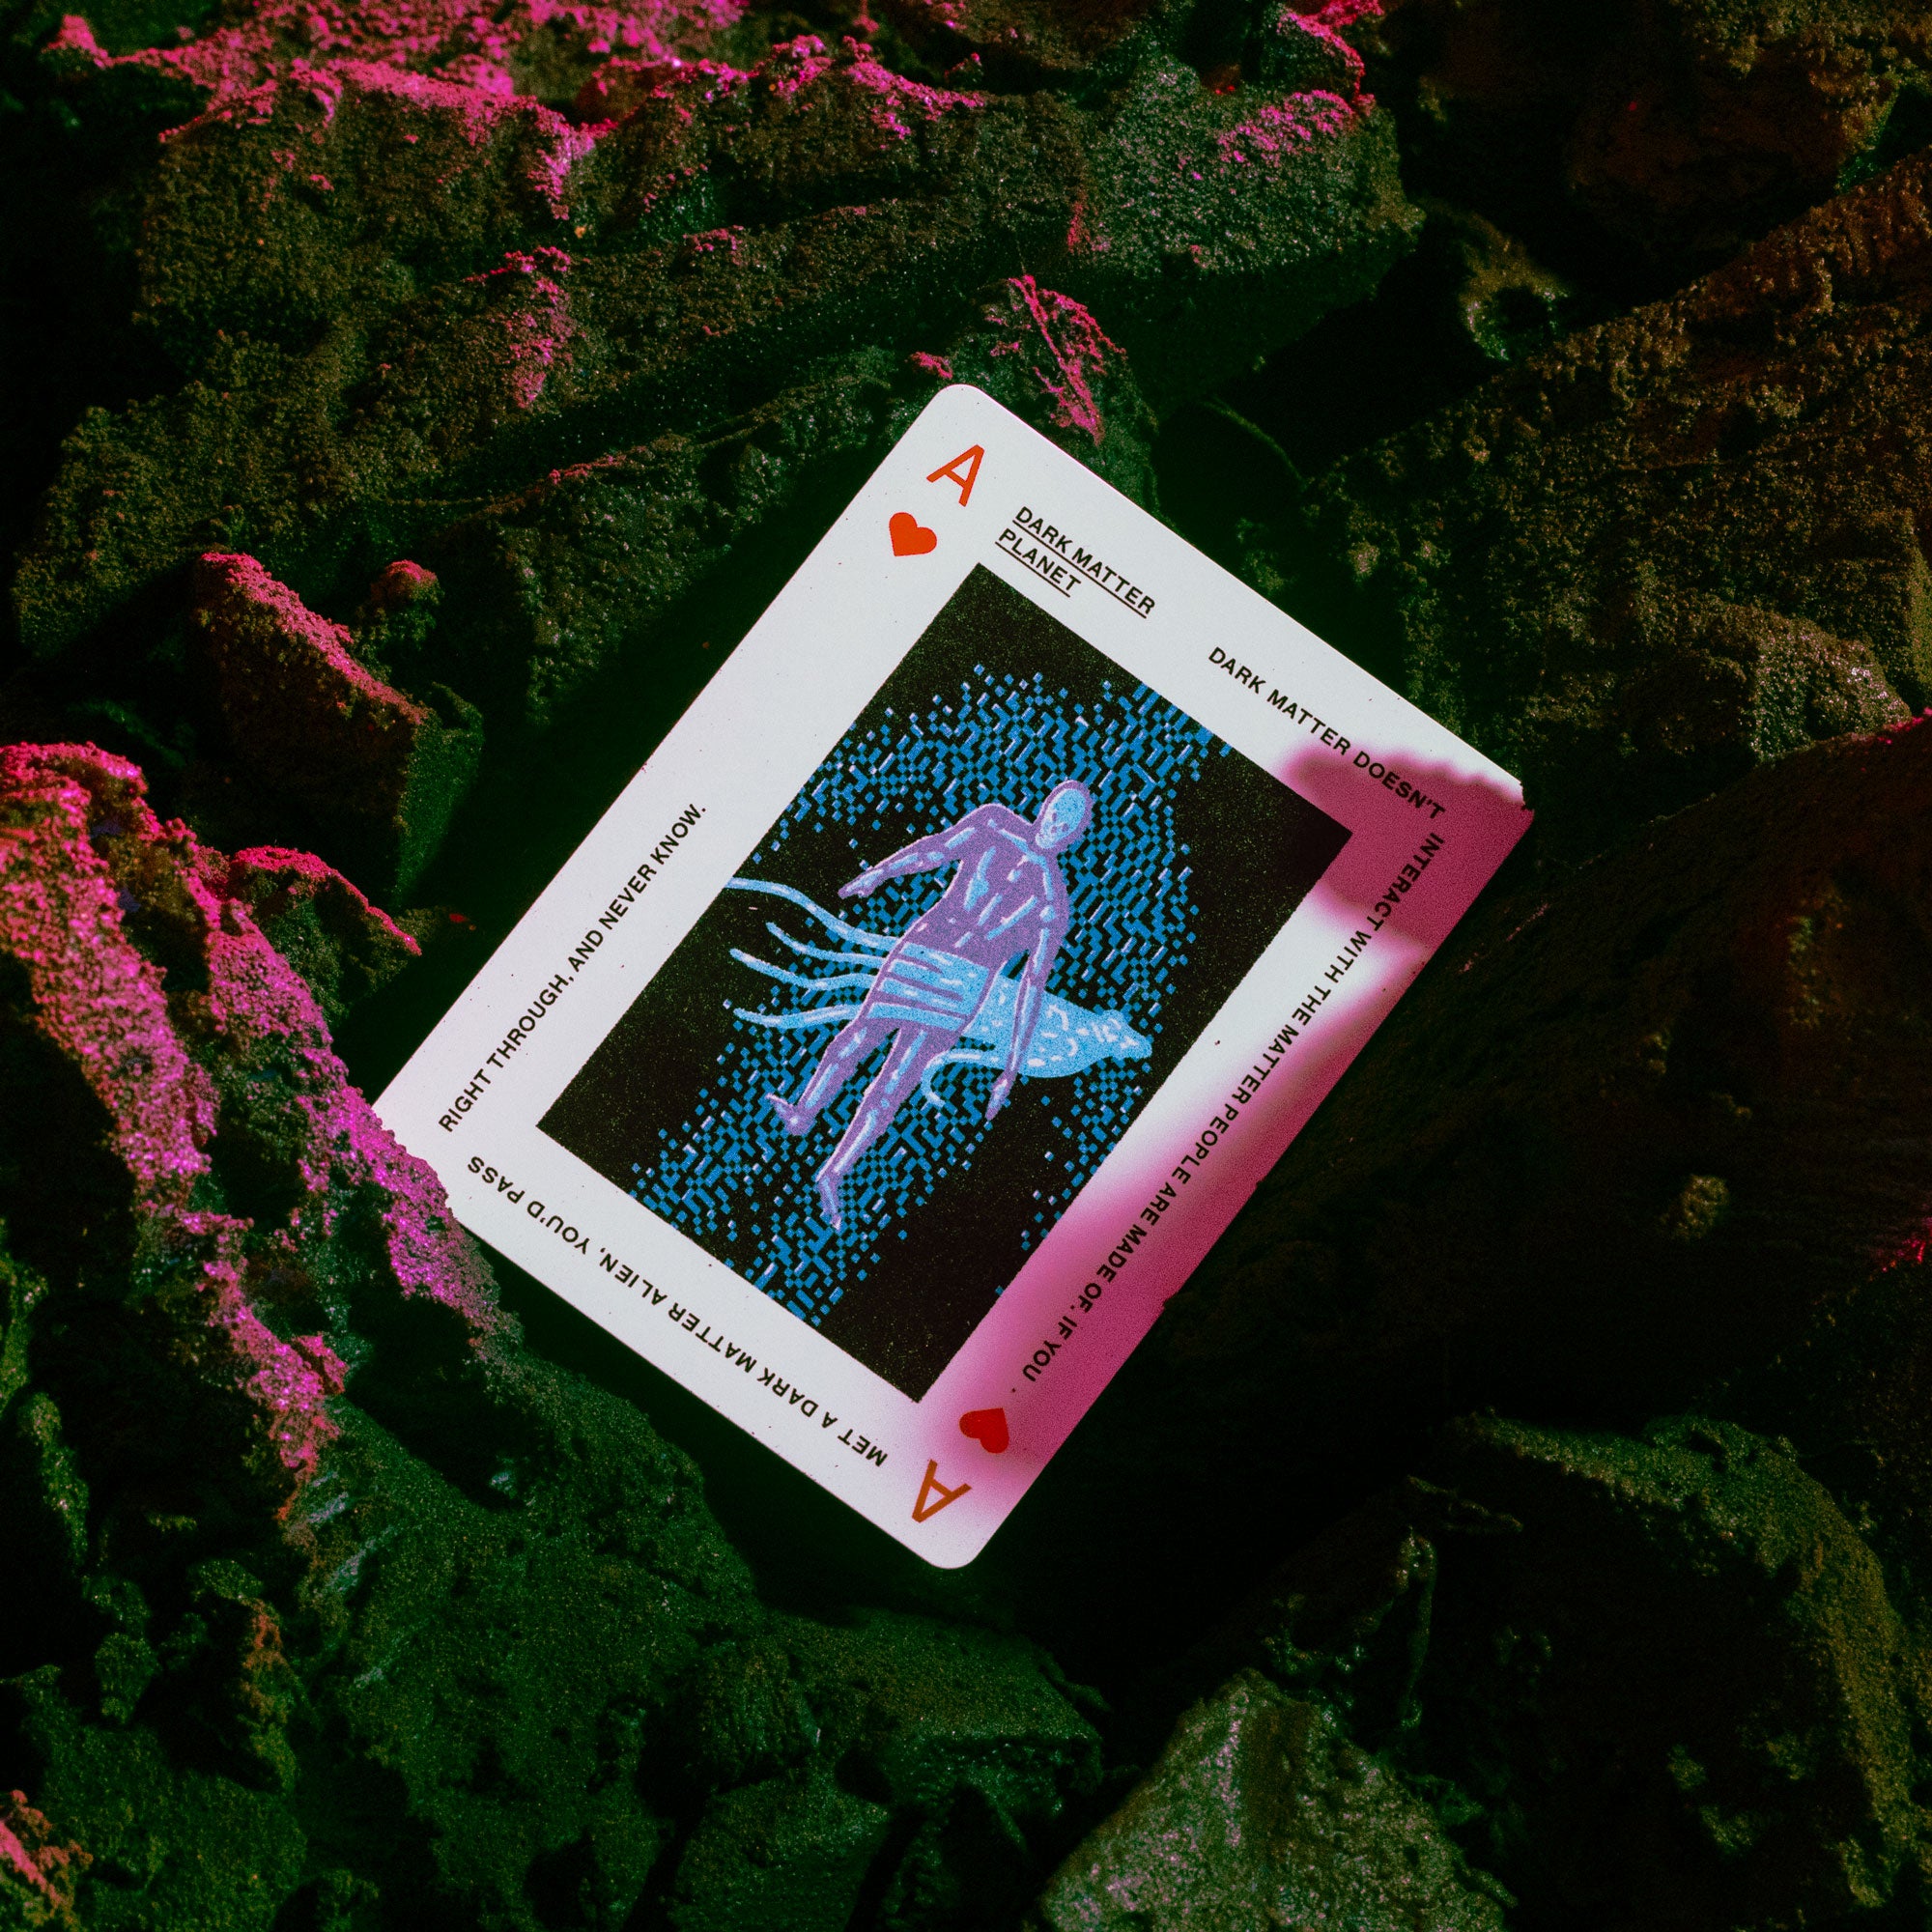 Exoplanet Playing Cards